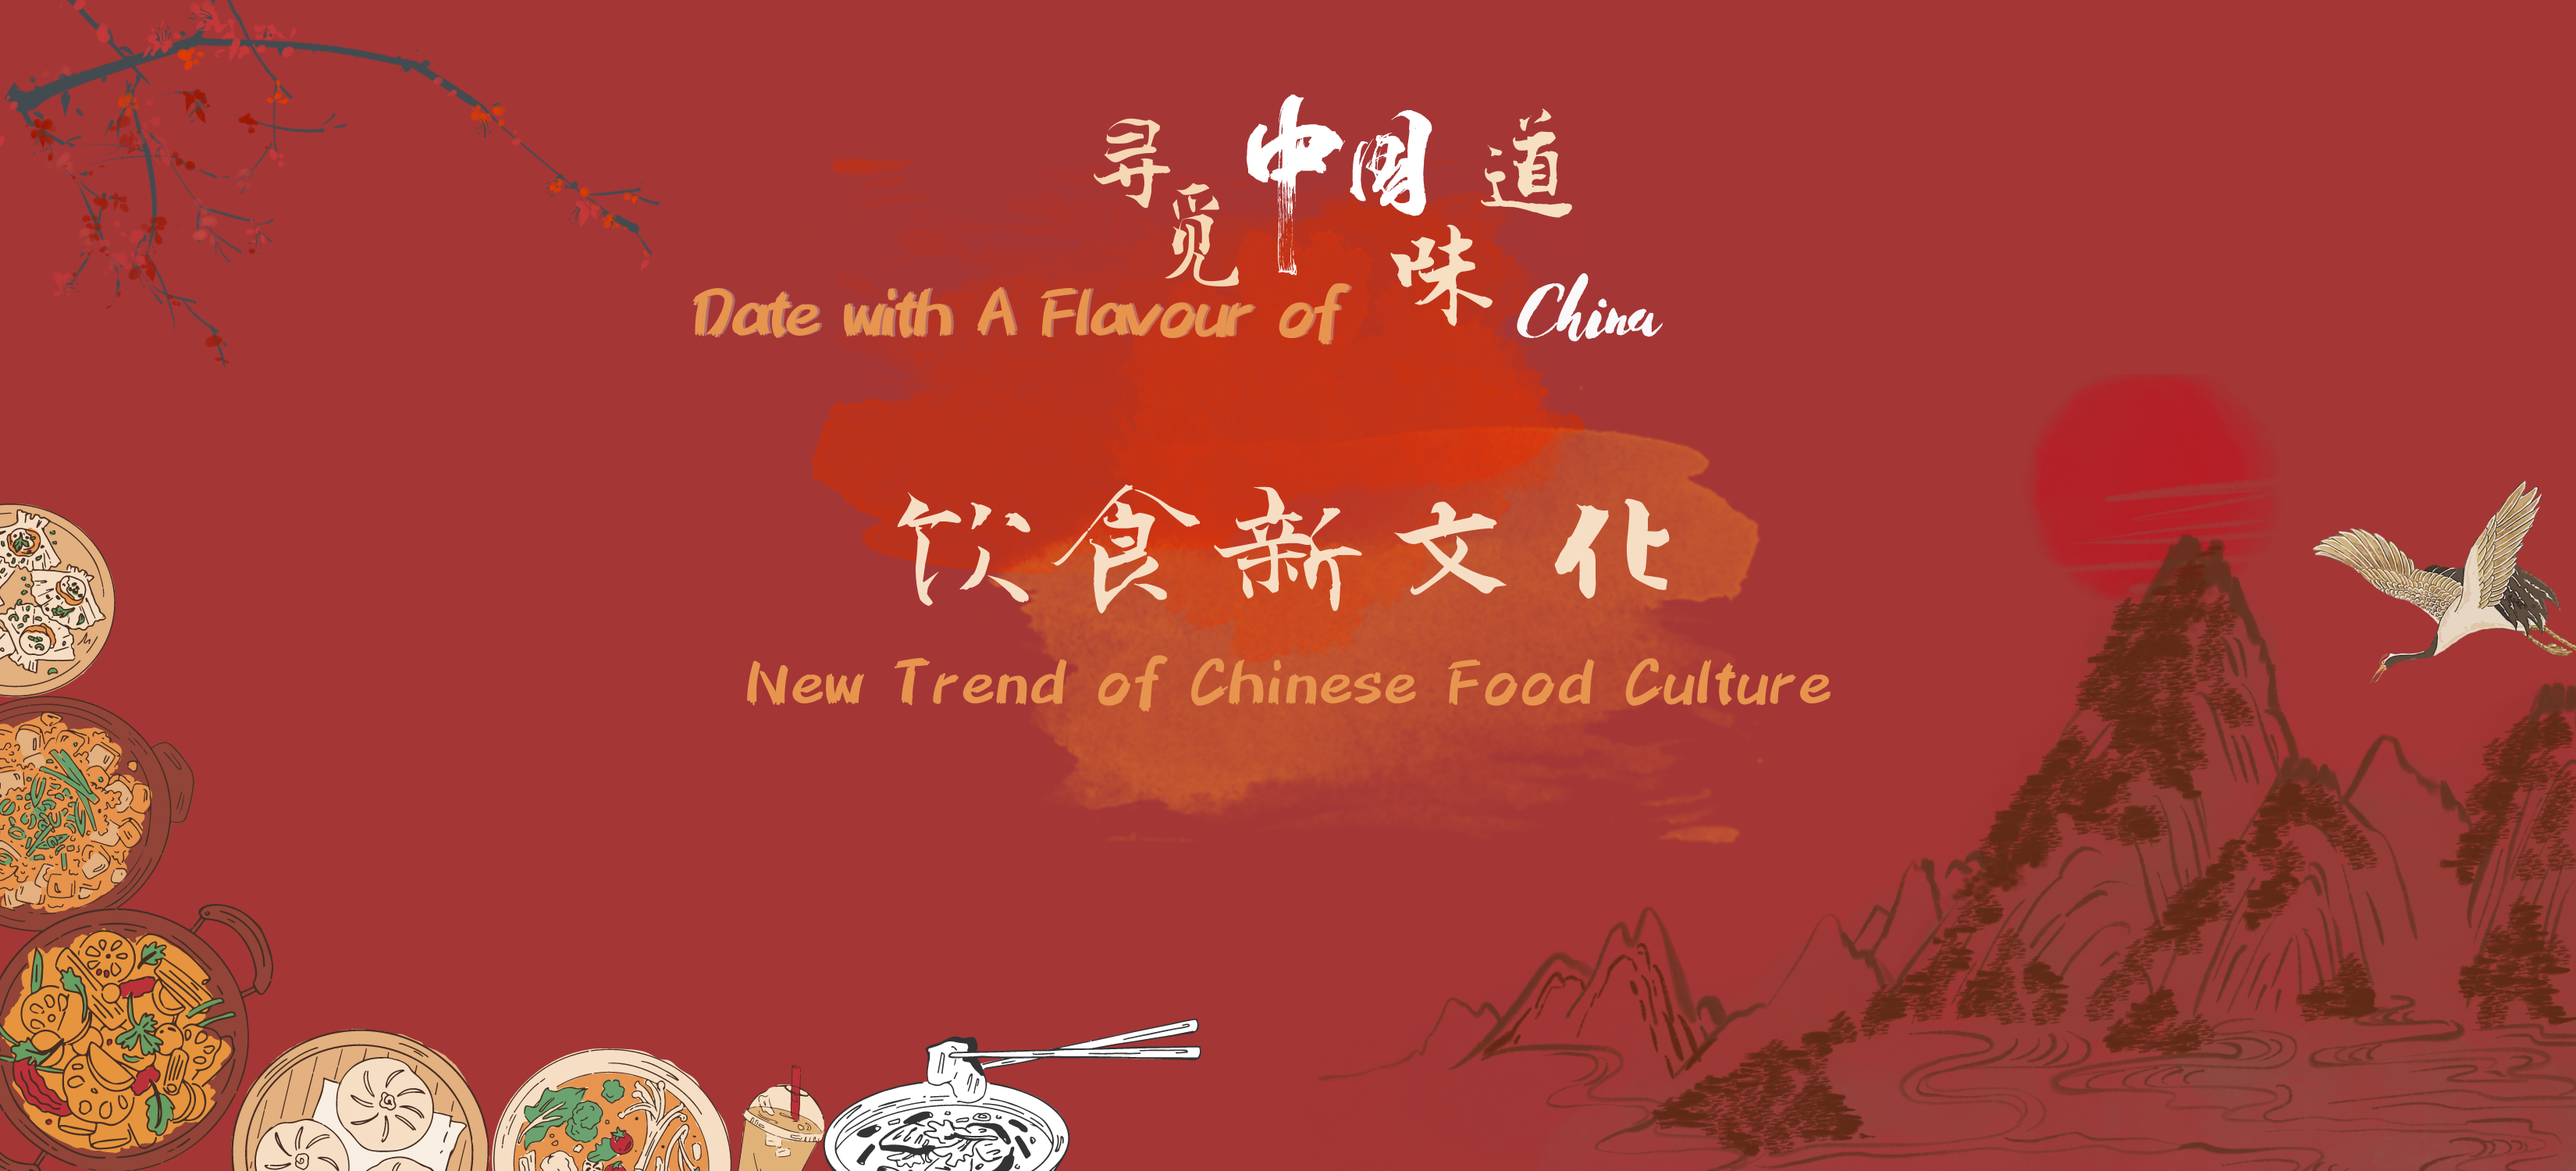 New Trend of Chinese Food Culture